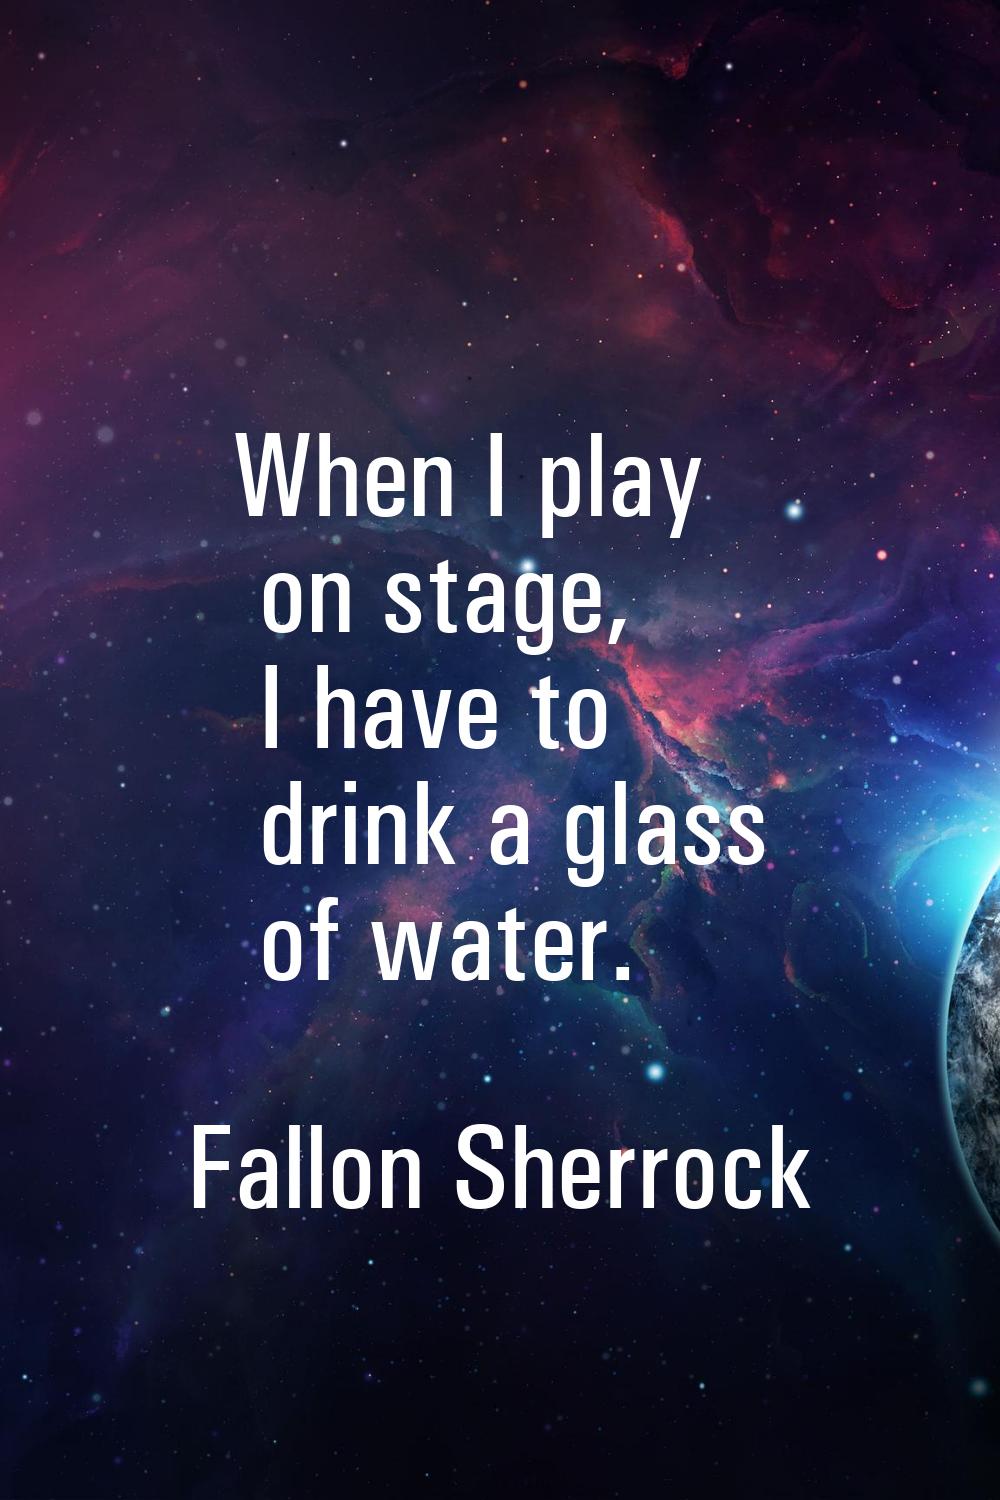 When I play on stage, I have to drink a glass of water.